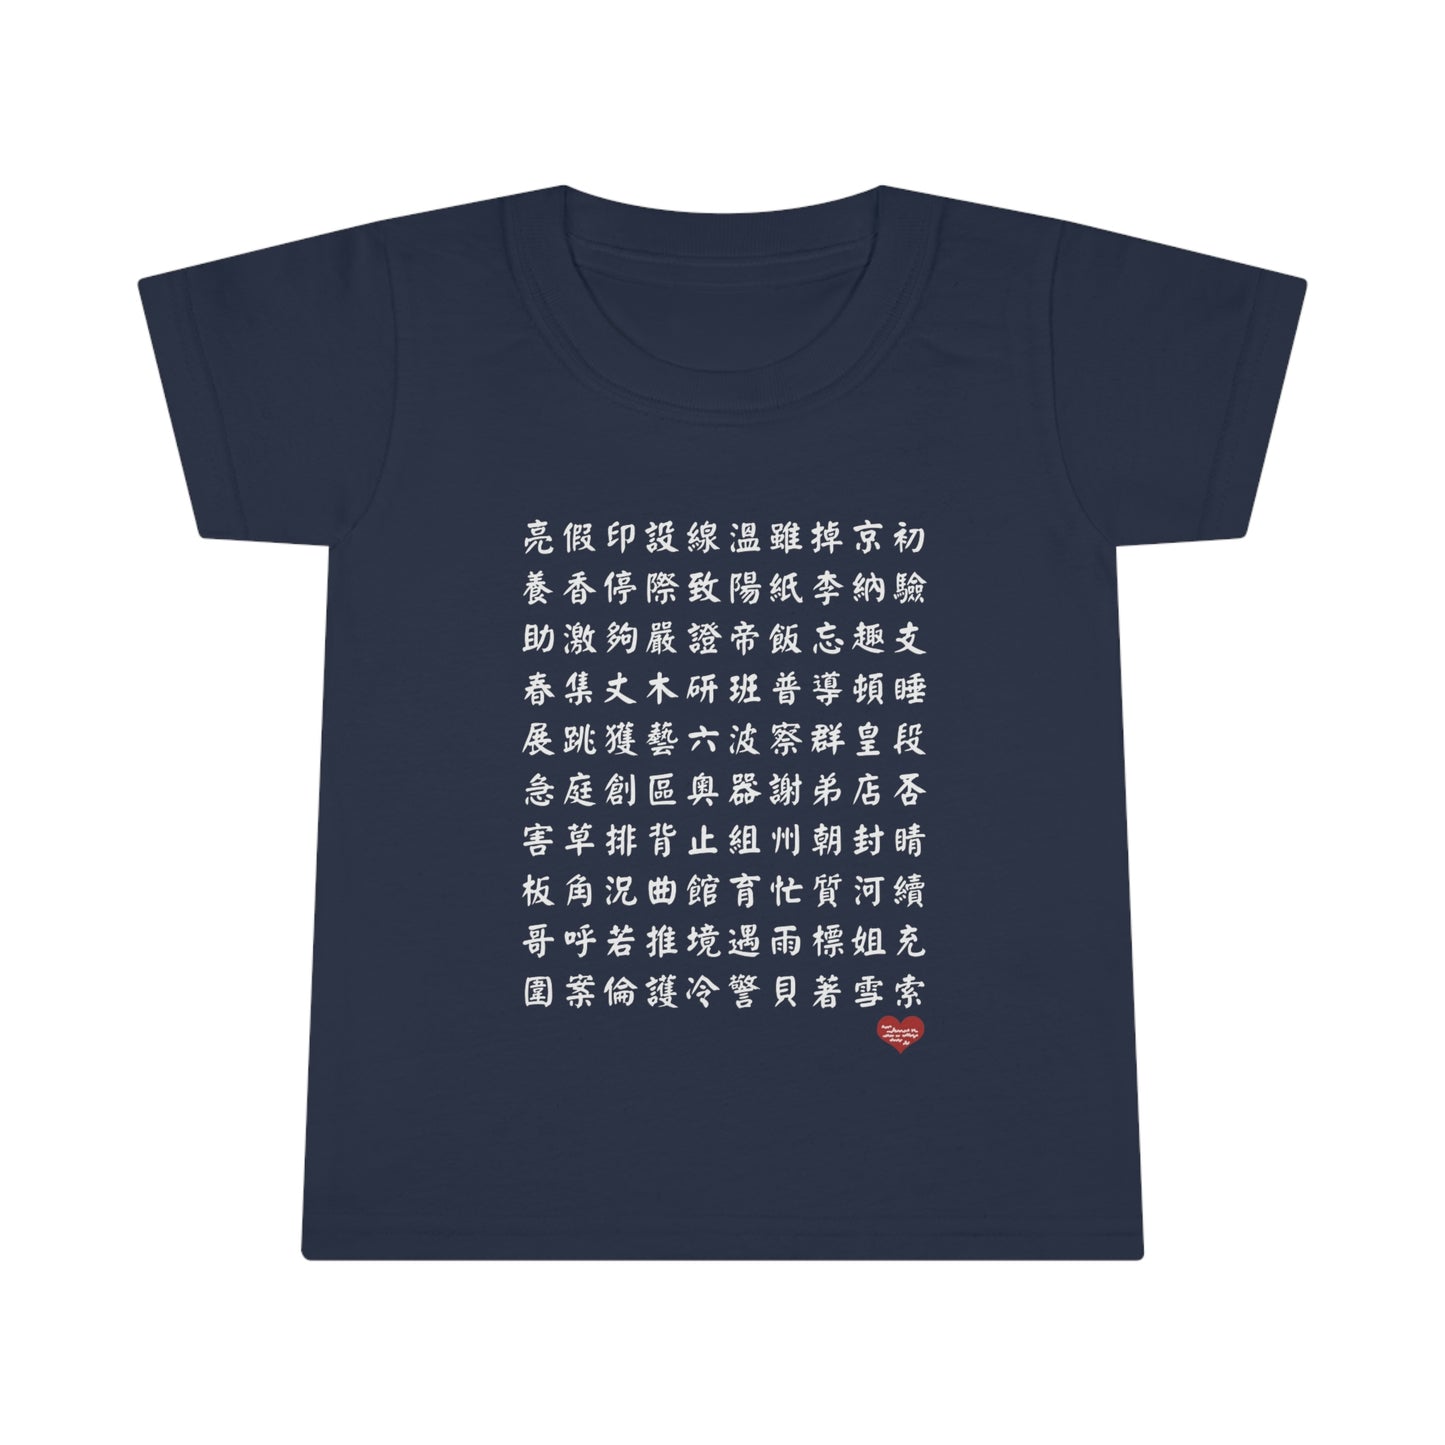 Toddler 1000 Characters Set 7,  1000漢字系列 #7 Color Block T-shirts